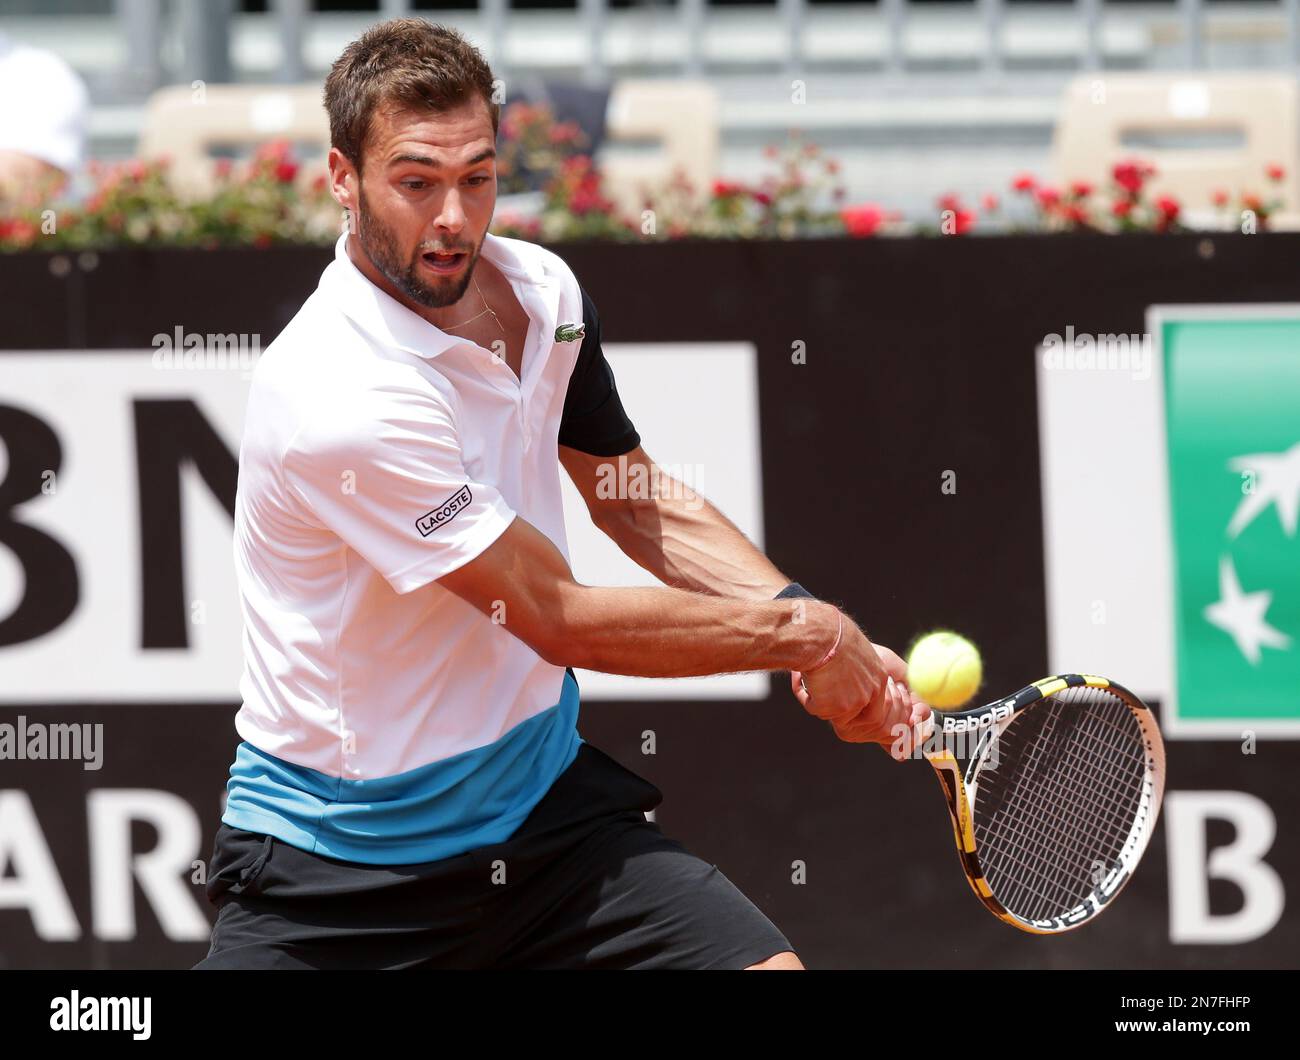 Frances Benoit Paire returns the ball to Italys Stefano Travaglia during their match at the Italian Open tennis tournament, in Rome, Monday, May 10, 2021